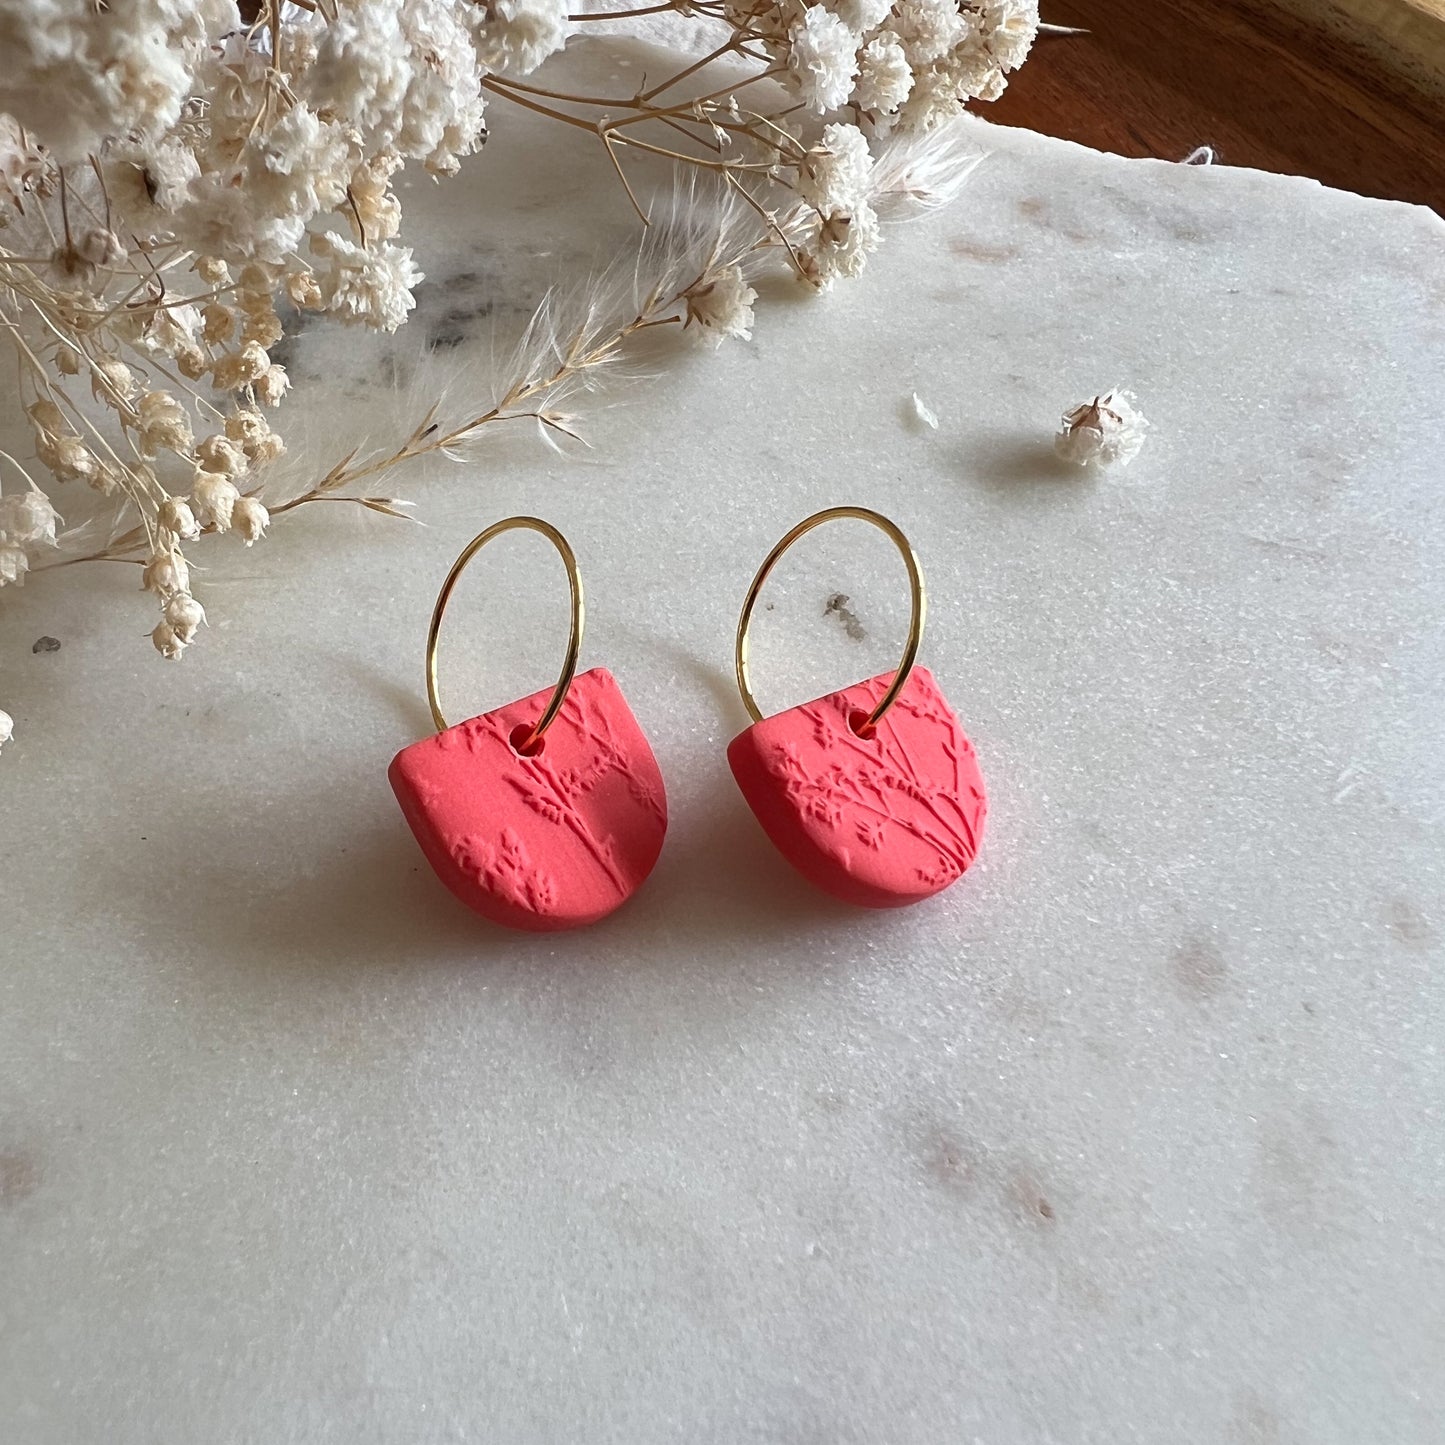 HIGAN HALF | half round drop on 15mm hoop earrings in blossom textured bright coral red